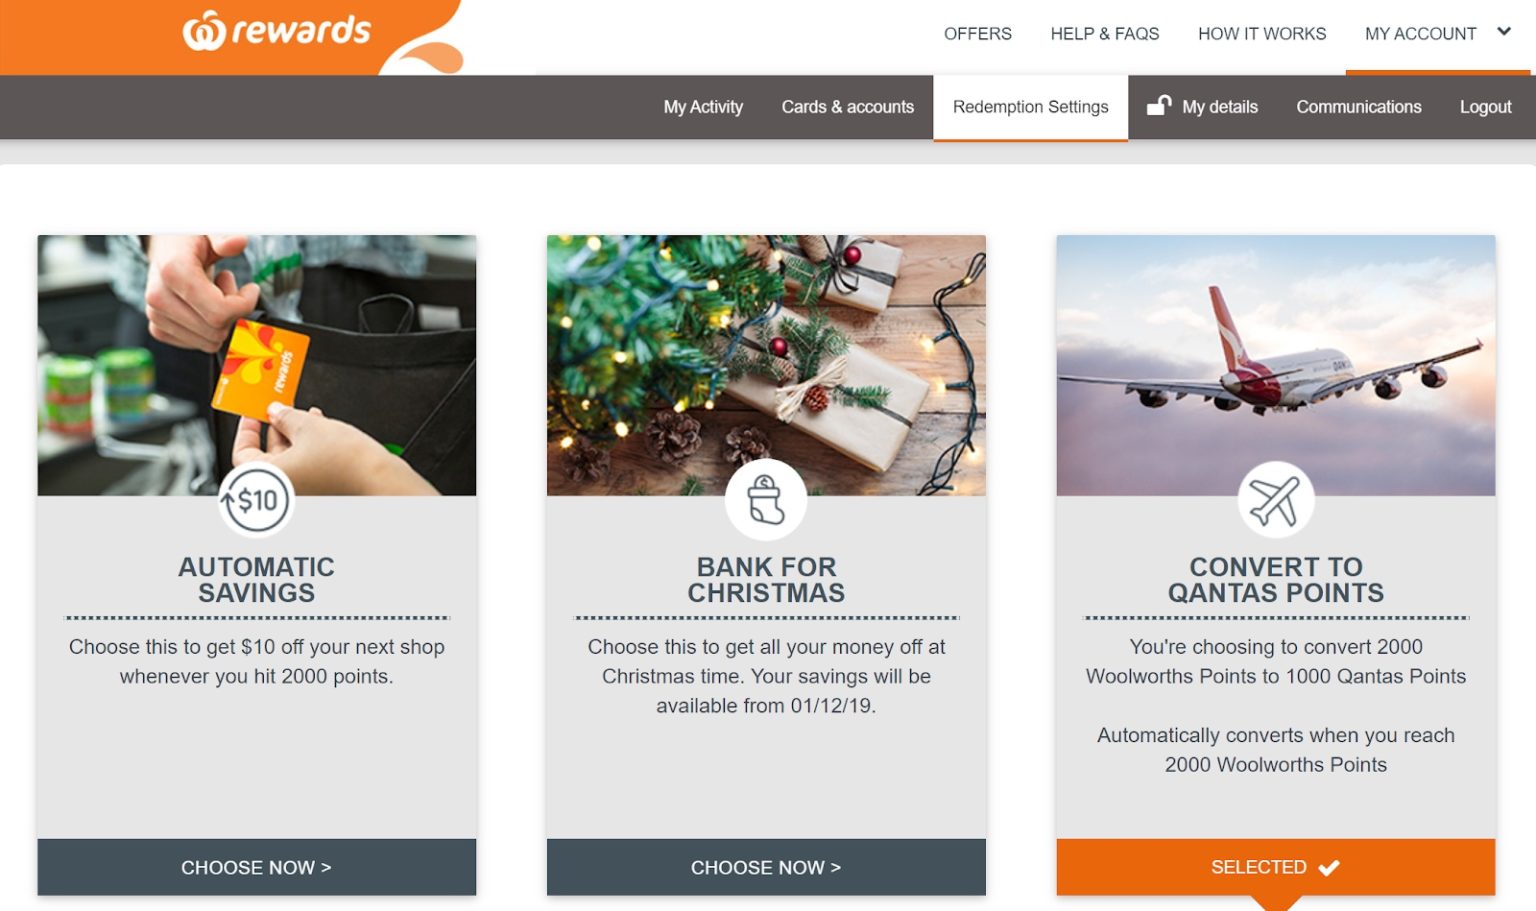 Woolworths Rewards Converting To Qantas Points 1536x911 